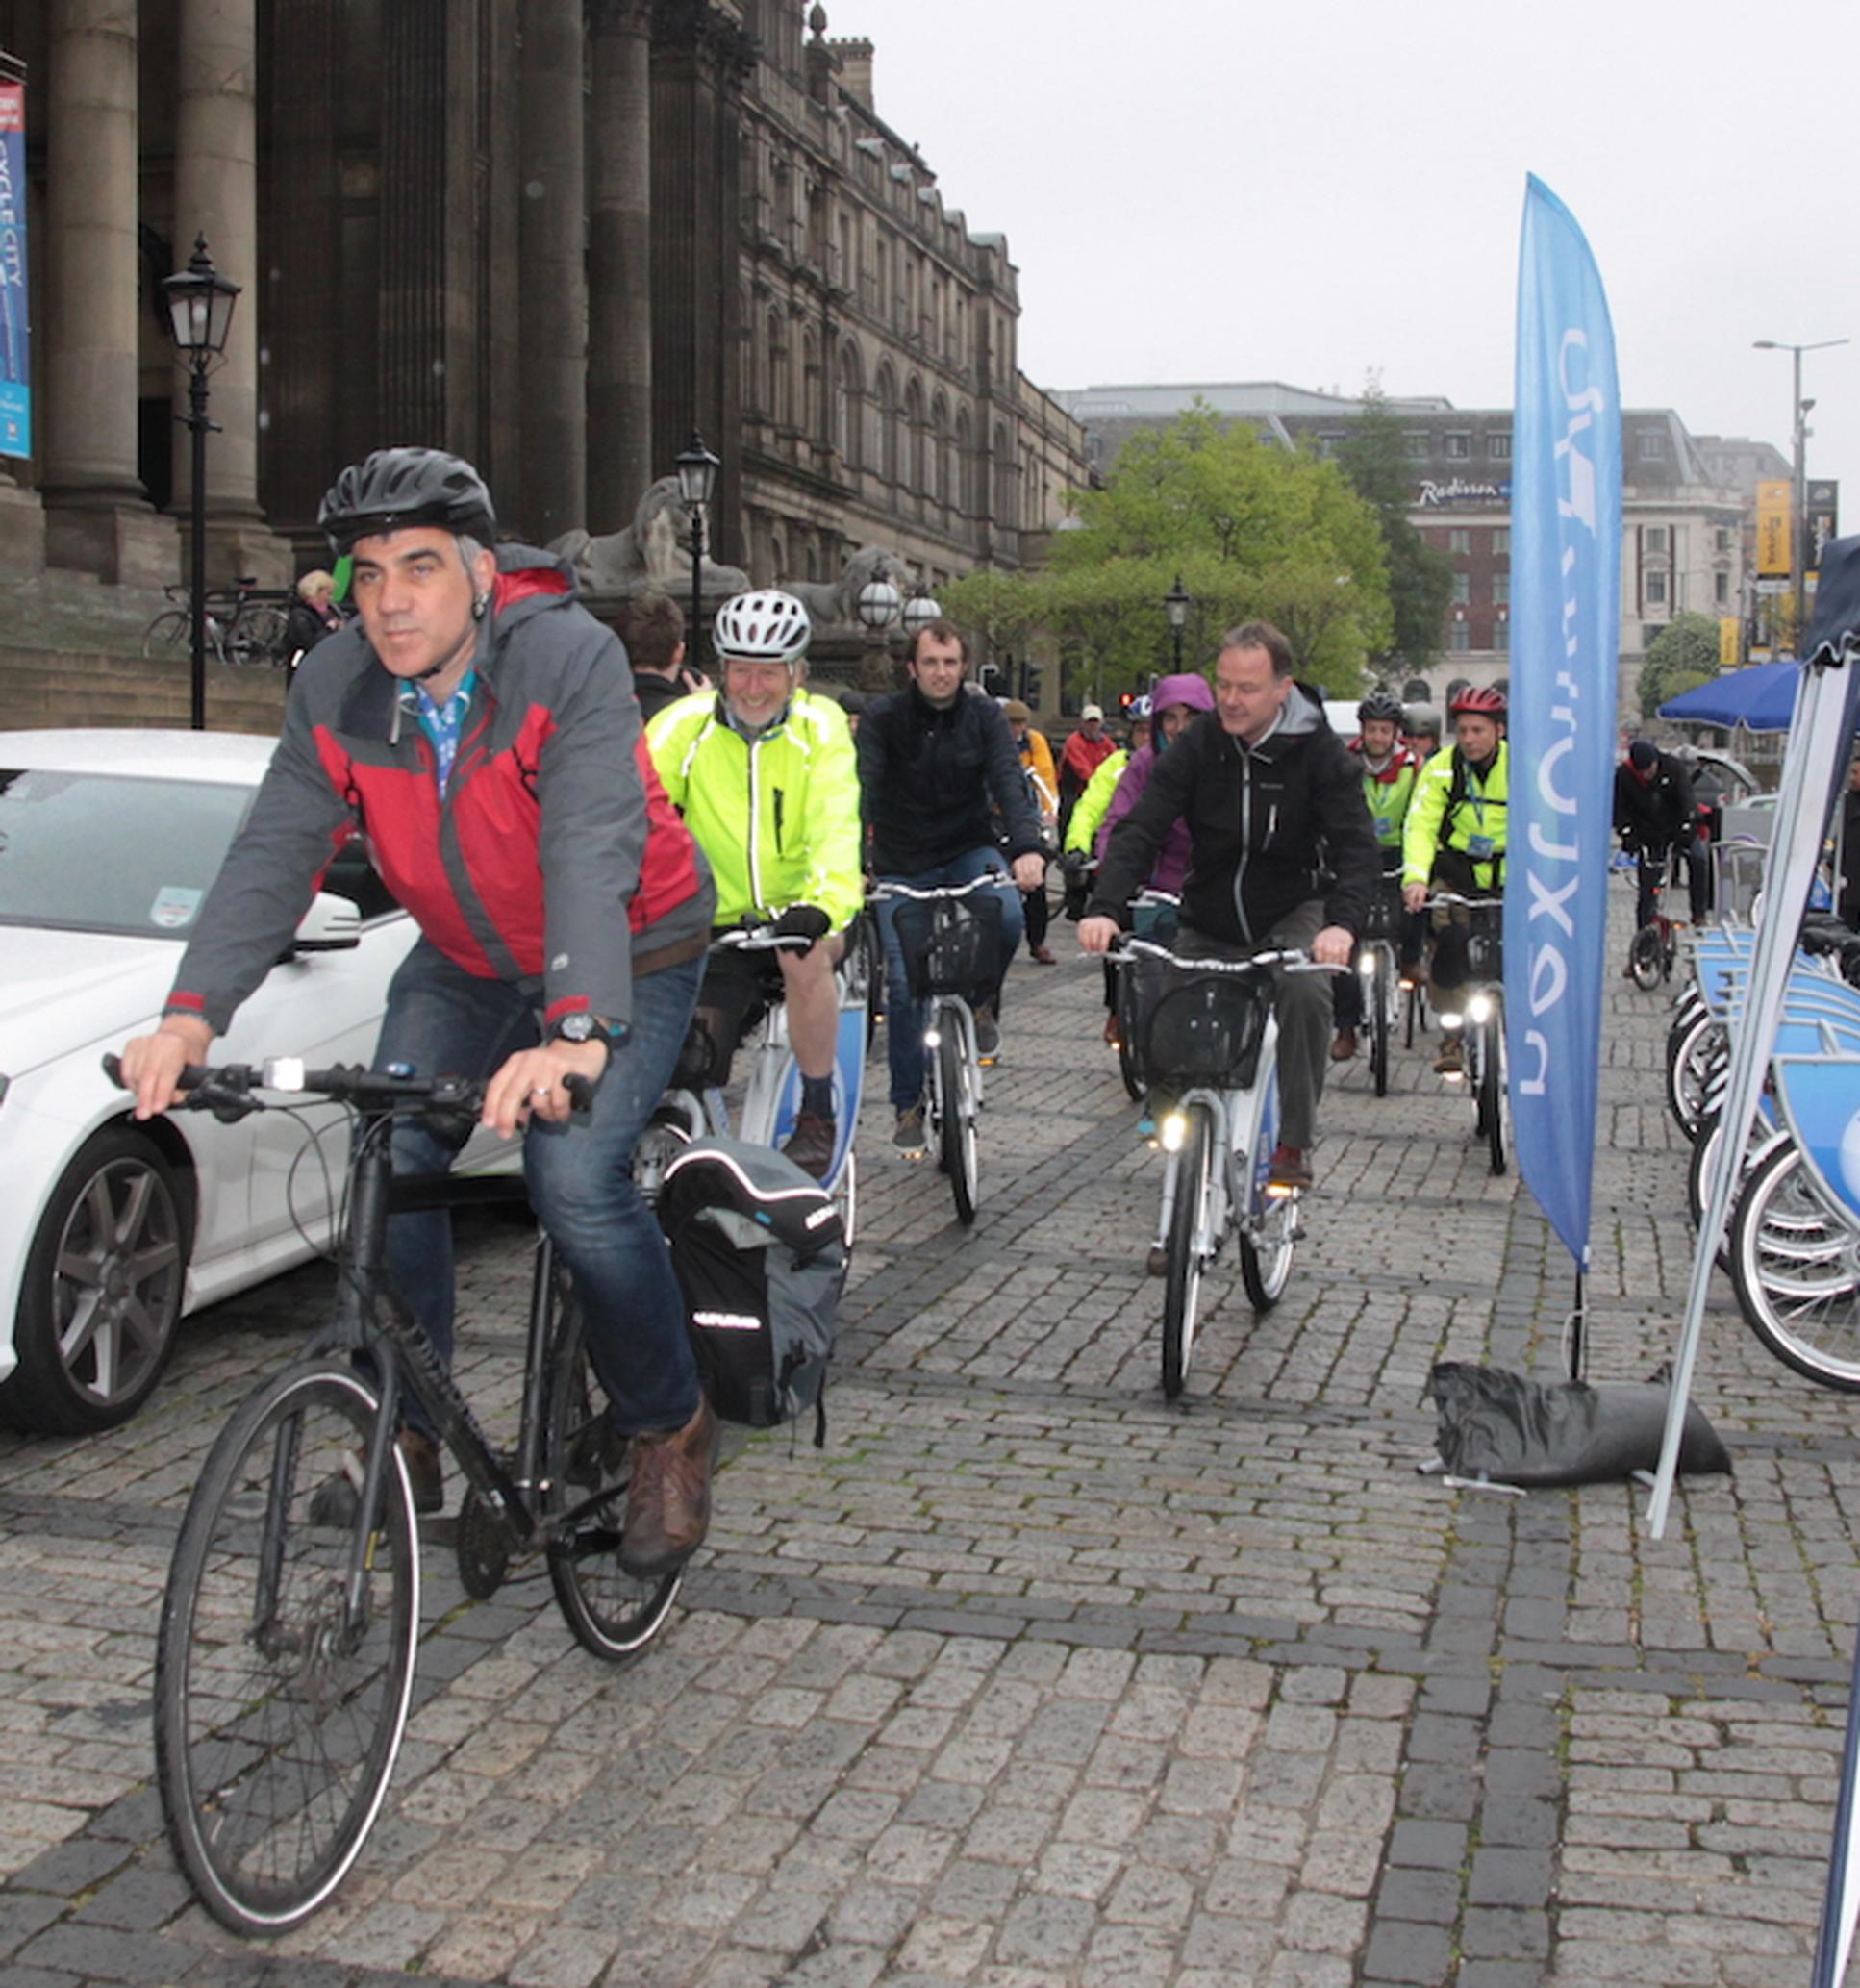 Pete Zanzottera offers a cycle tour of Leeds during a previous Cycle City Active City event